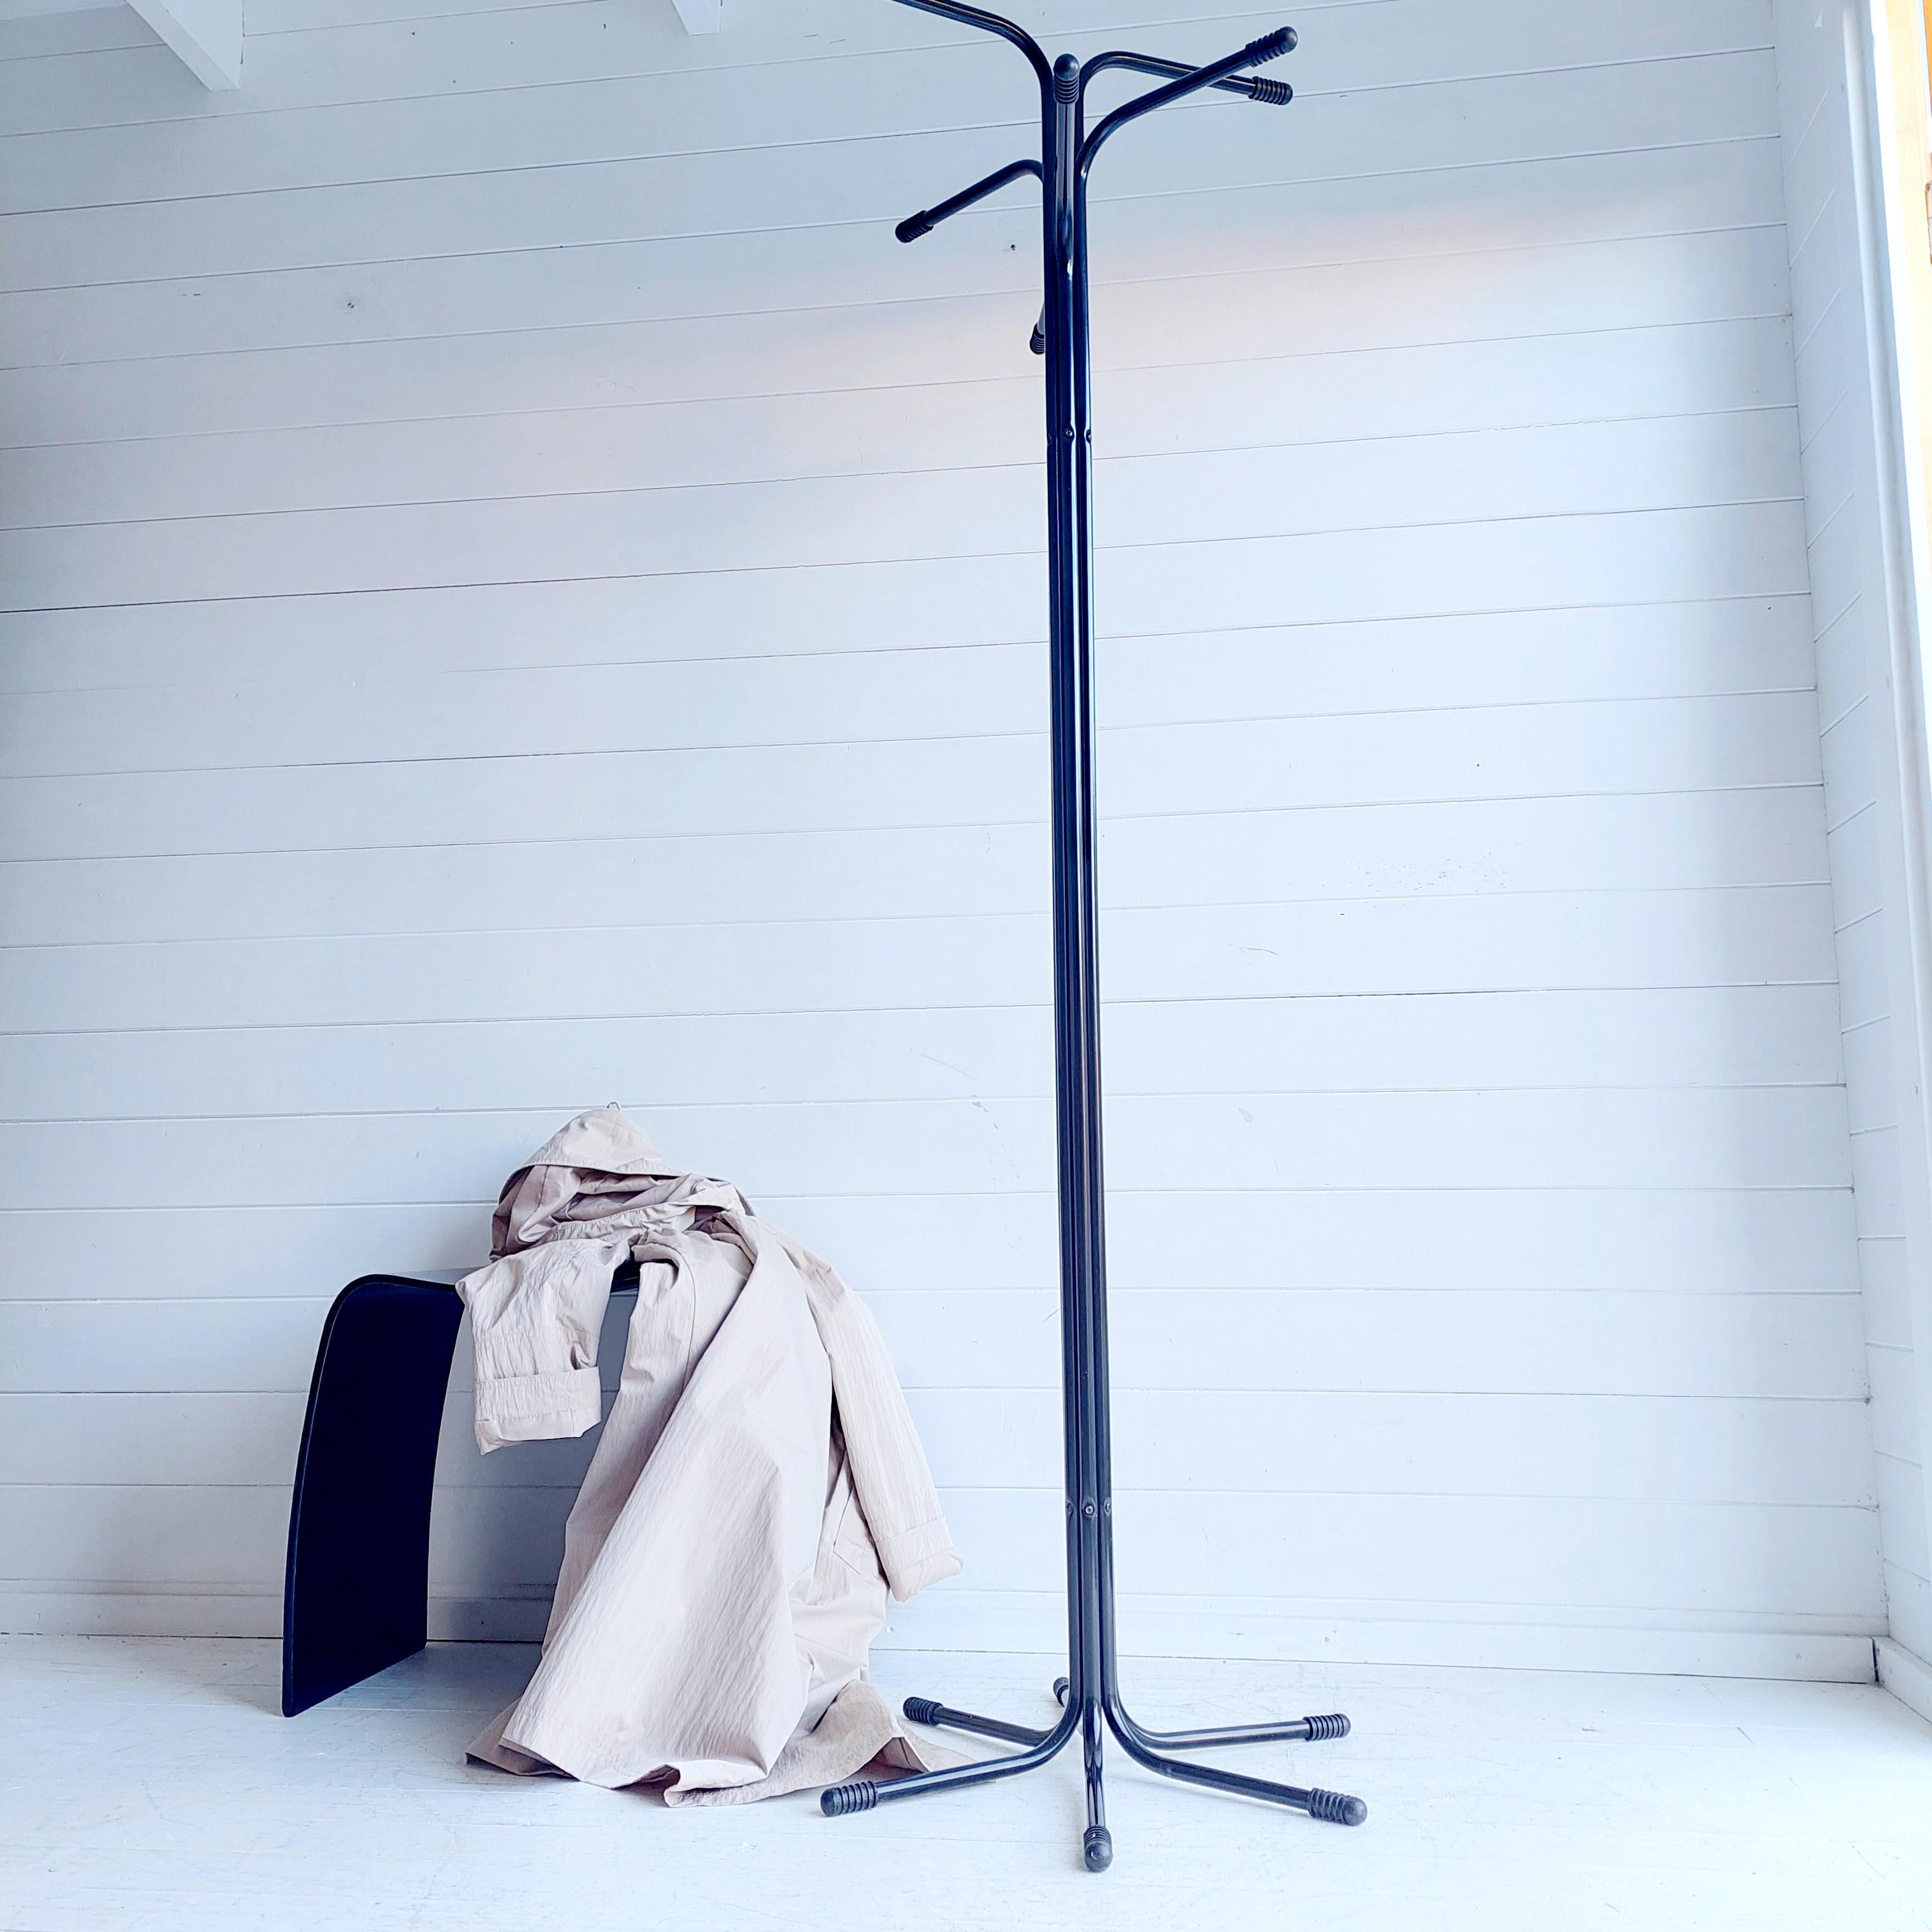 Vintage Rigg Coat Stand by Tord Bjorklund for Ikea 80s Tubular Metal Black In Good Condition For Sale In Leamington Spa, GB